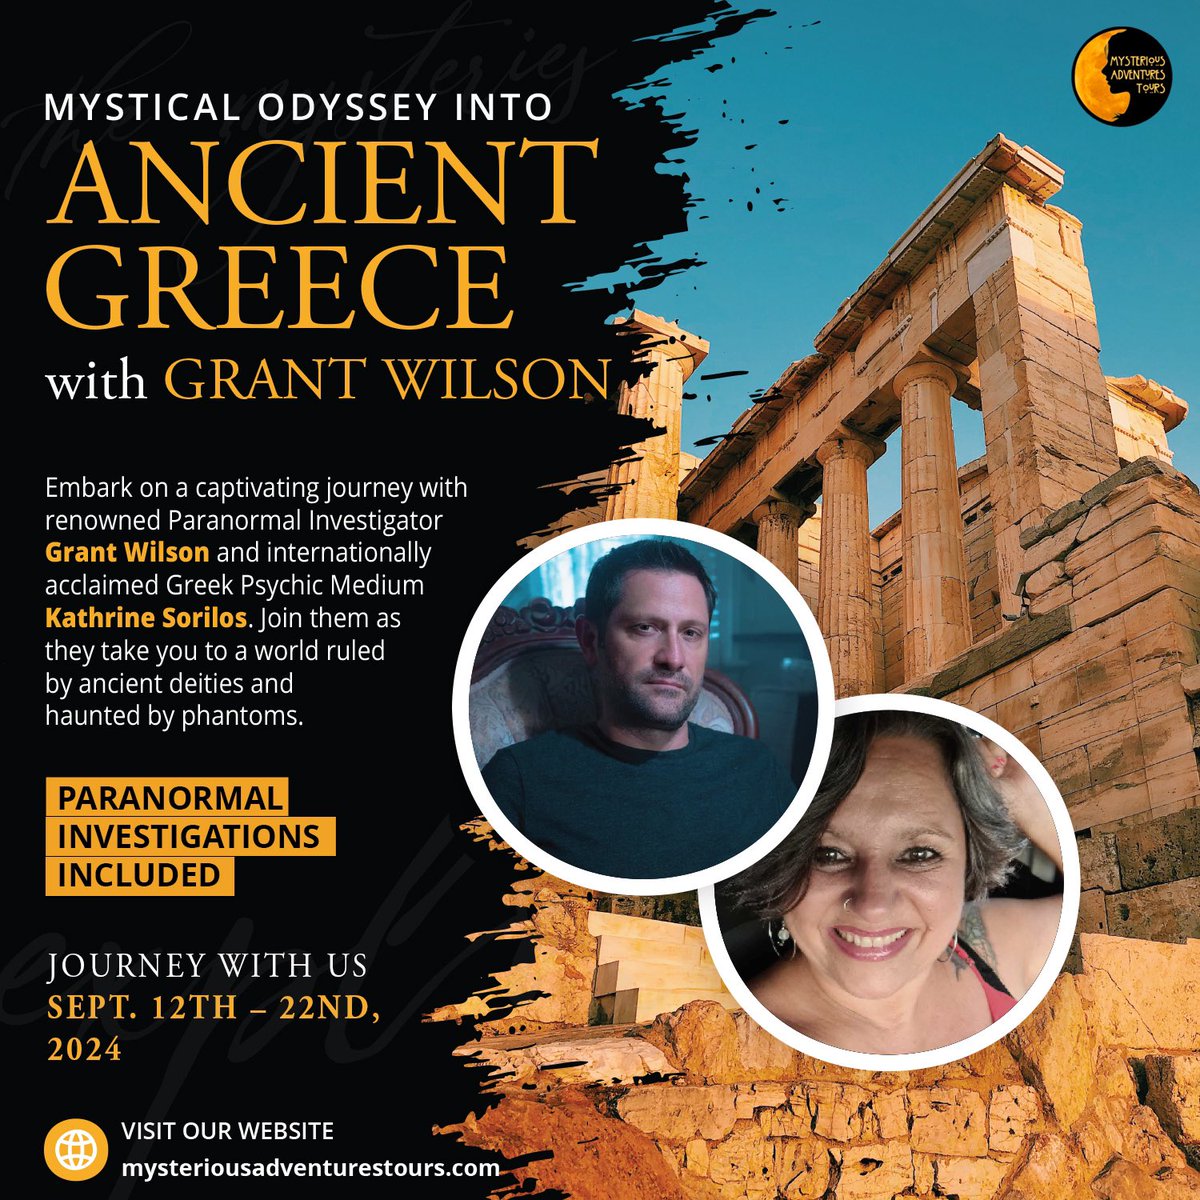 Come explore the history and mystery of Greece with @ReannaWilson3, myself, and the lovely Katherine Sorilos! Investigate haunted hospitals and even a temple of necromancy! Visit MysteriousAdventuresTours.com for more!